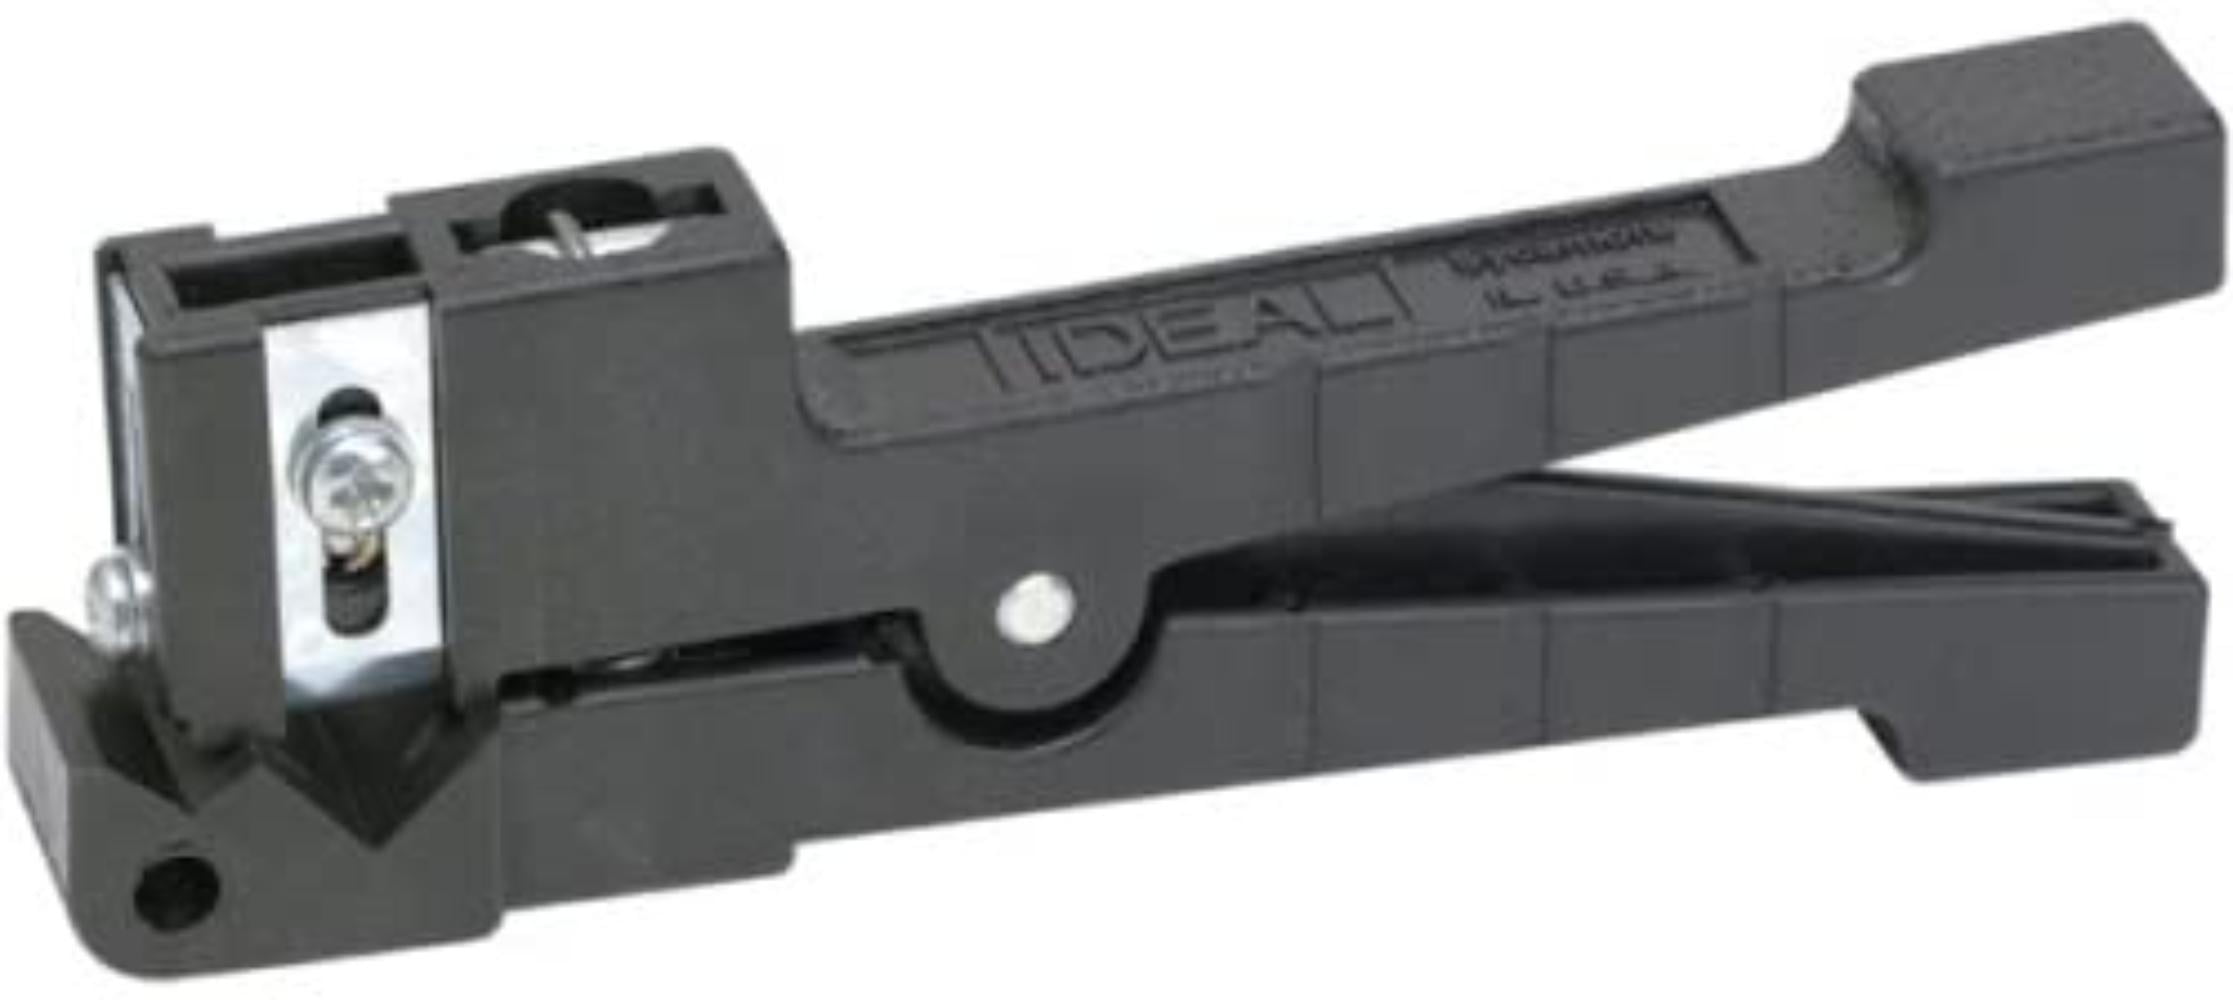 IDEAL 45-165 UTP/STP CABLE STRIPPER 